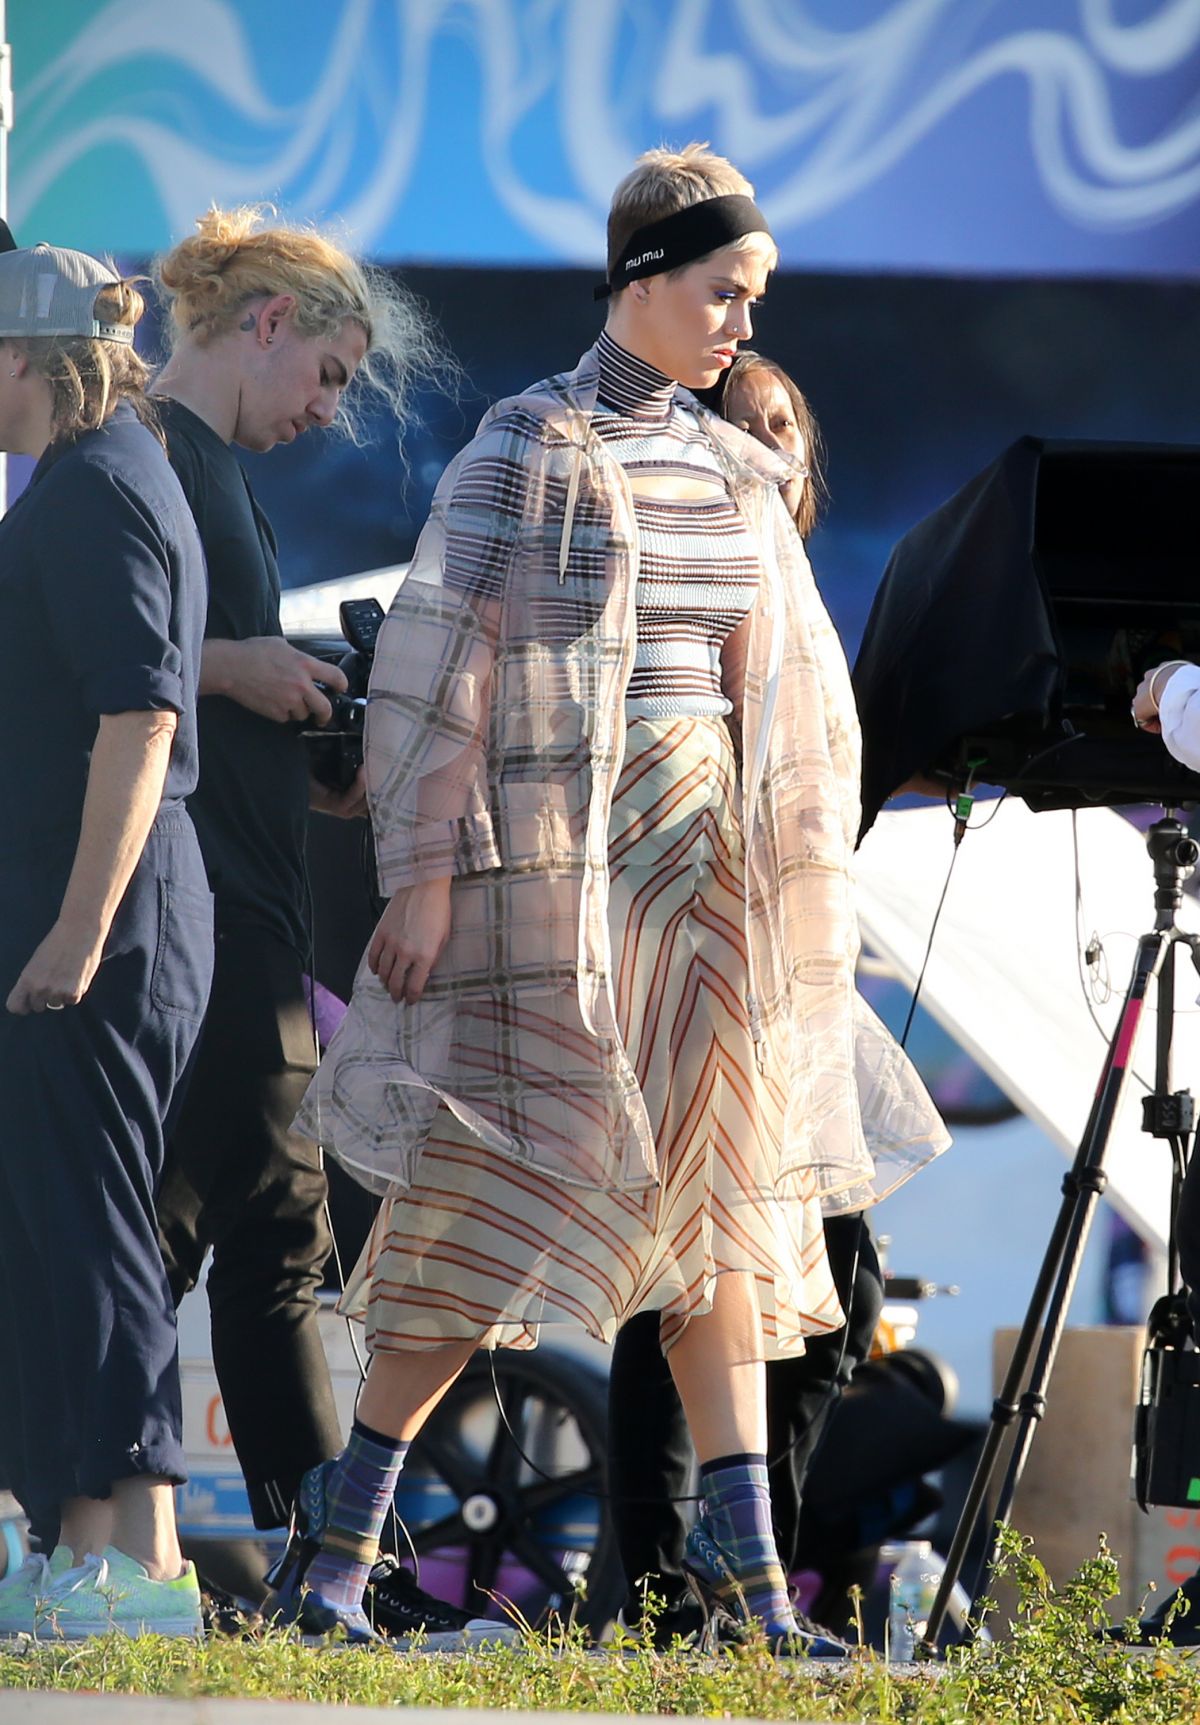 Katy Perry On The Set Of A Photoshoot In Wynwood Arts District In Miami